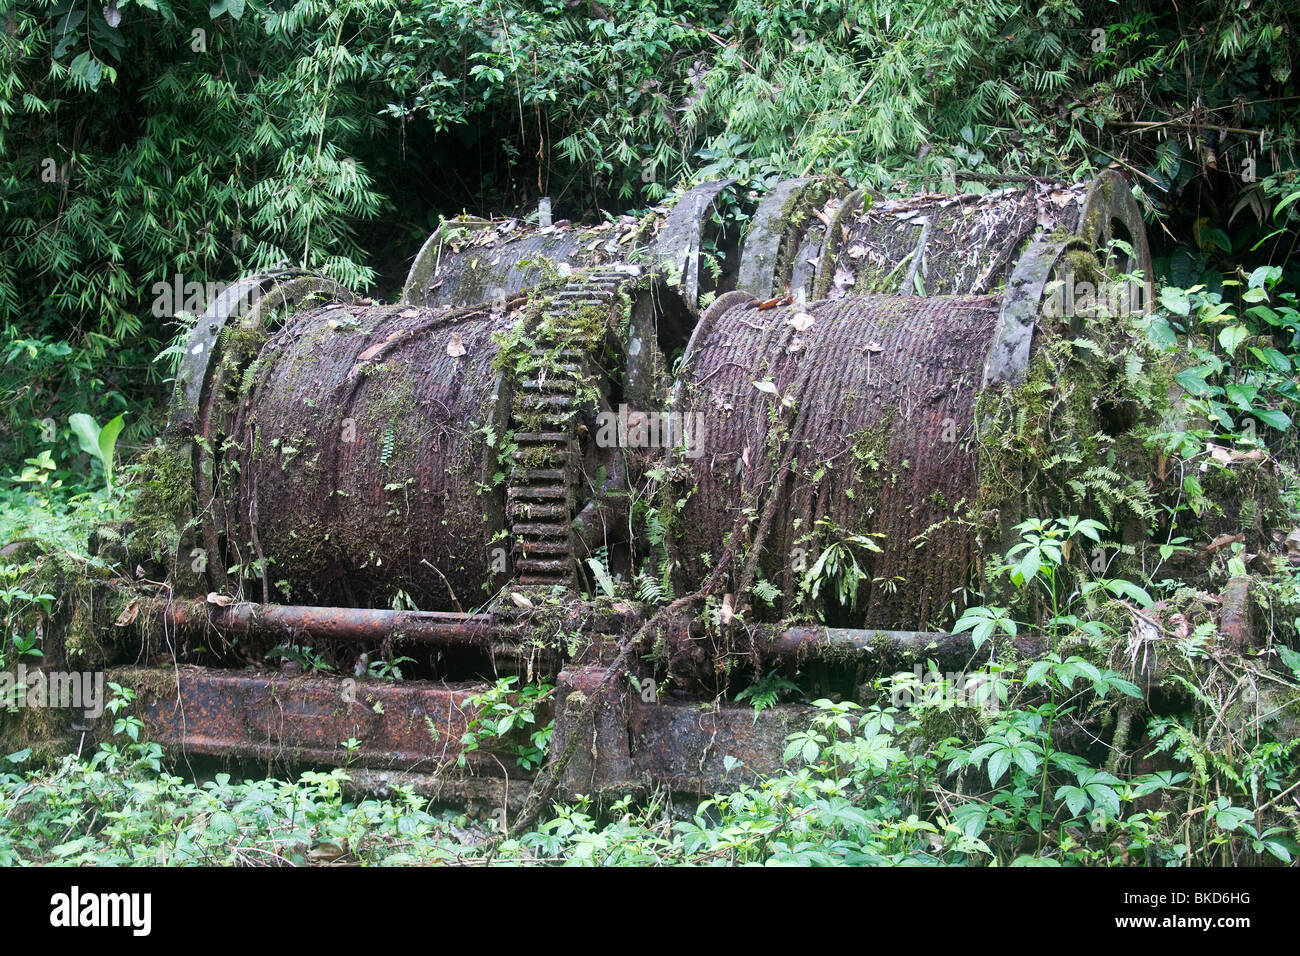 P2Pa-22D, CABLE DRUMS FOR RAISING/LOWERING MATERIAL INTO GOLD MINE, Darian National Park, Panama Stock Photo